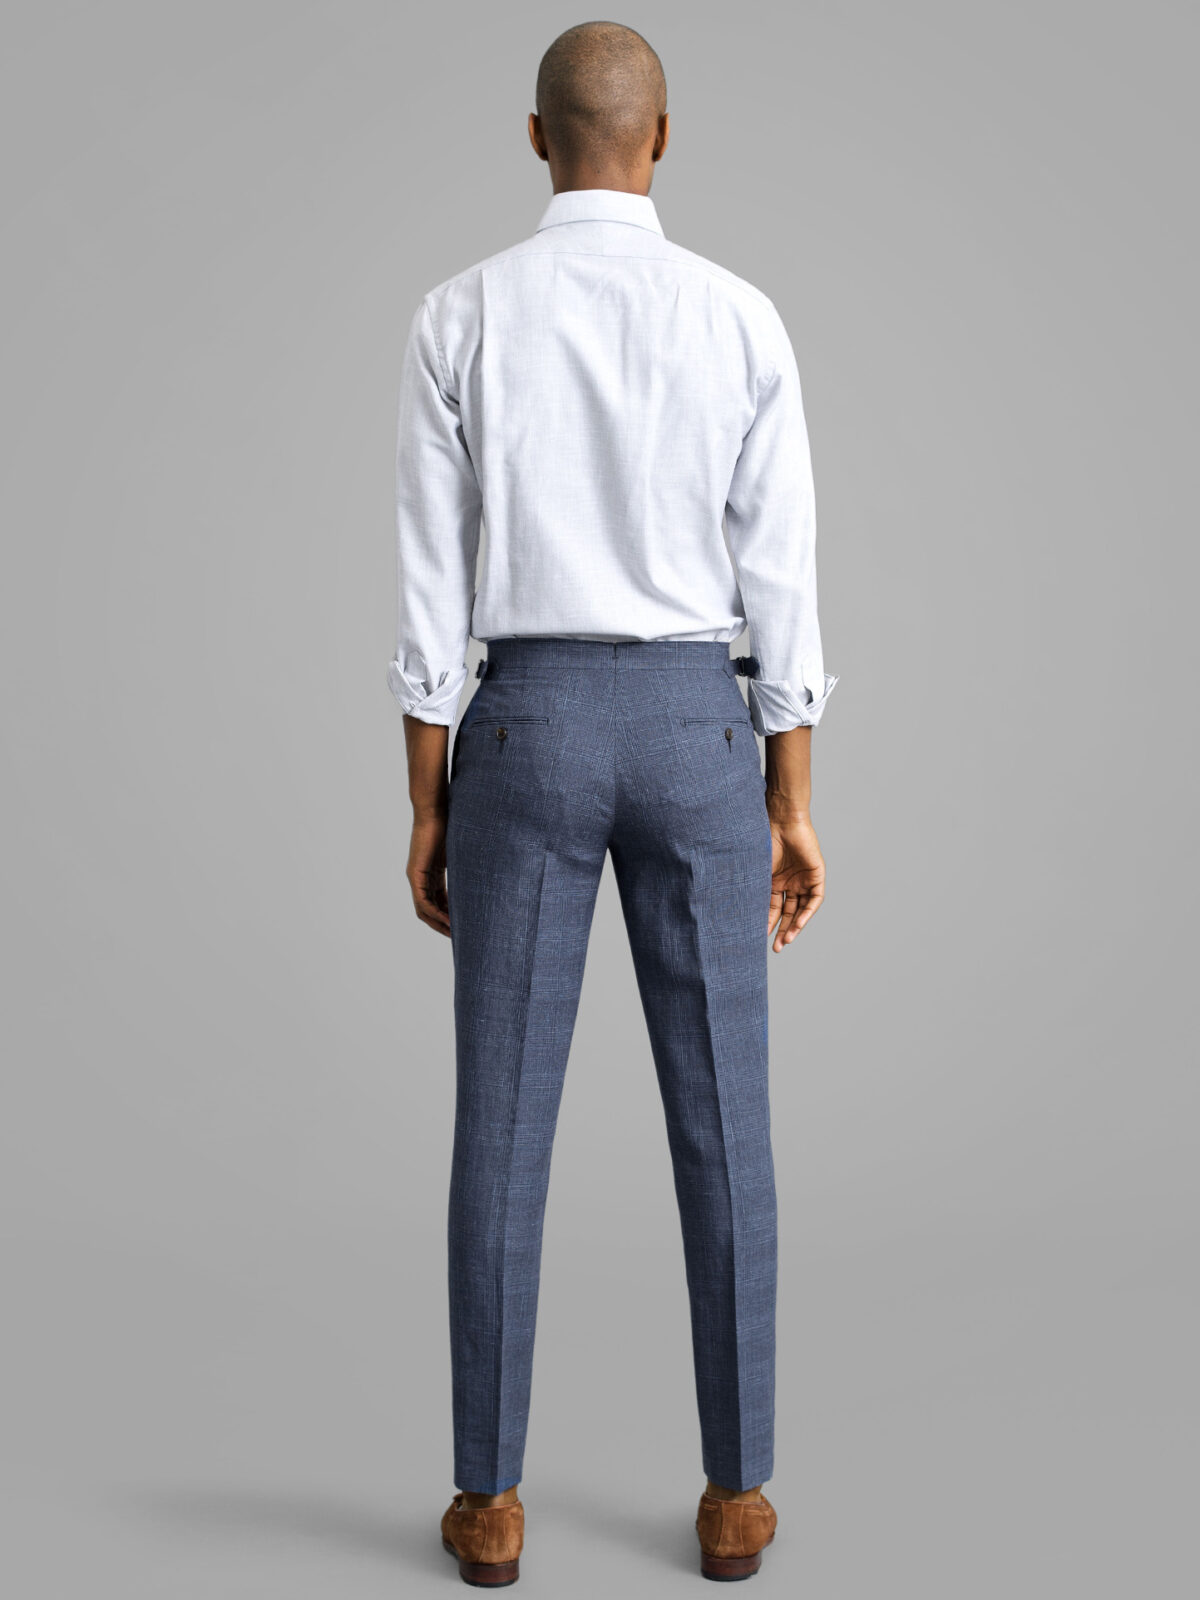 Solbiati Stone Gray Linen Suit : Made To Measure Custom Jeans For